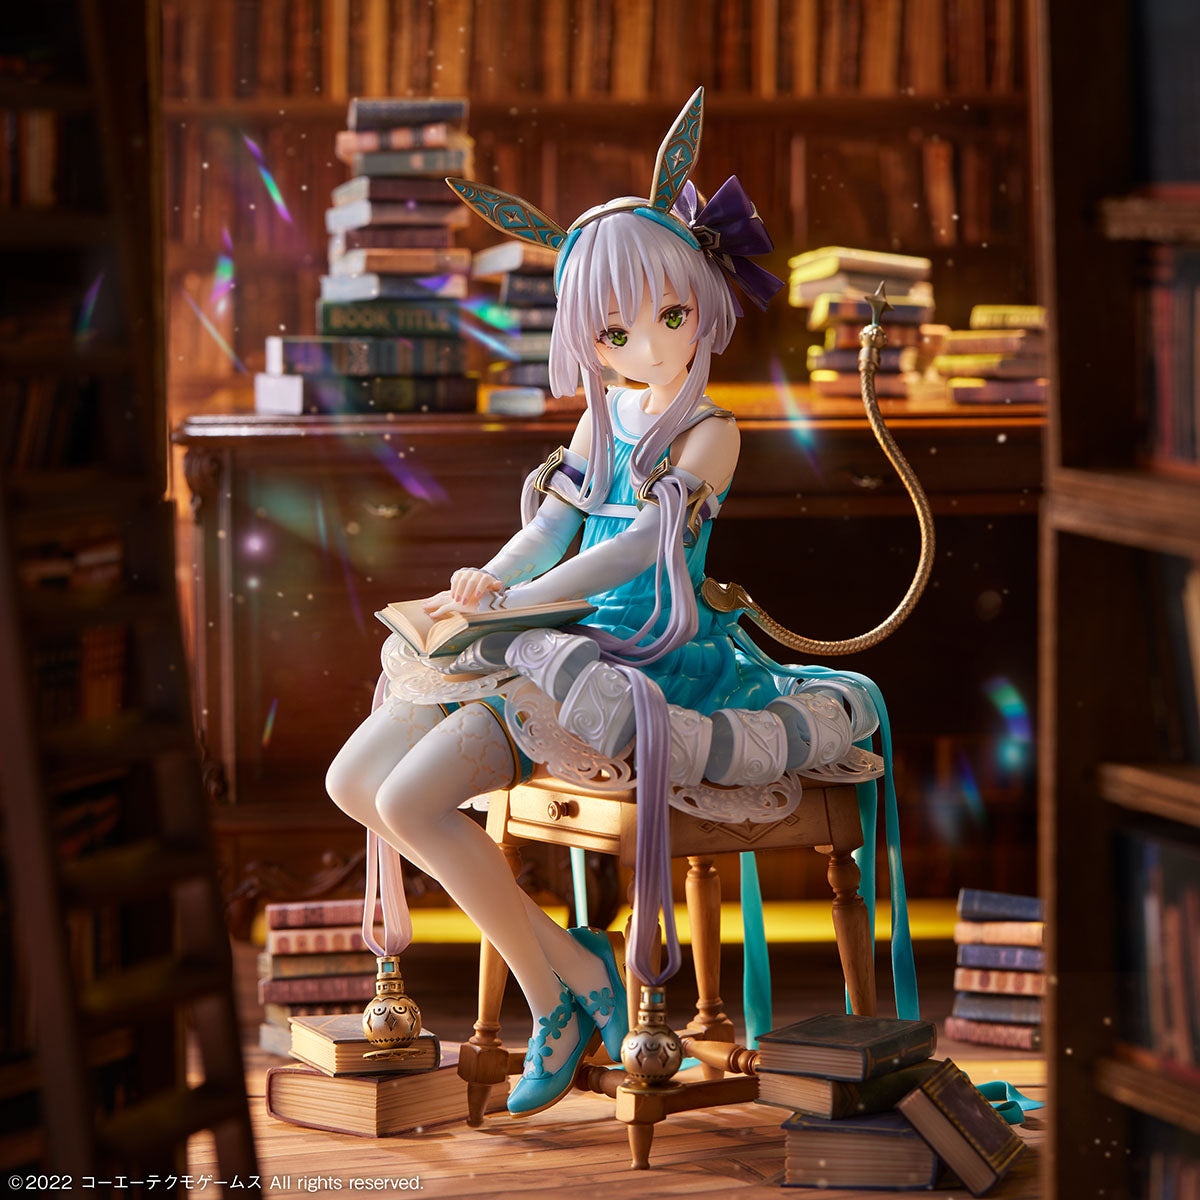 Atelier Sophie 2 : The Alchemist of the Mysterious Dream Plachta 1/7 Complete Figure